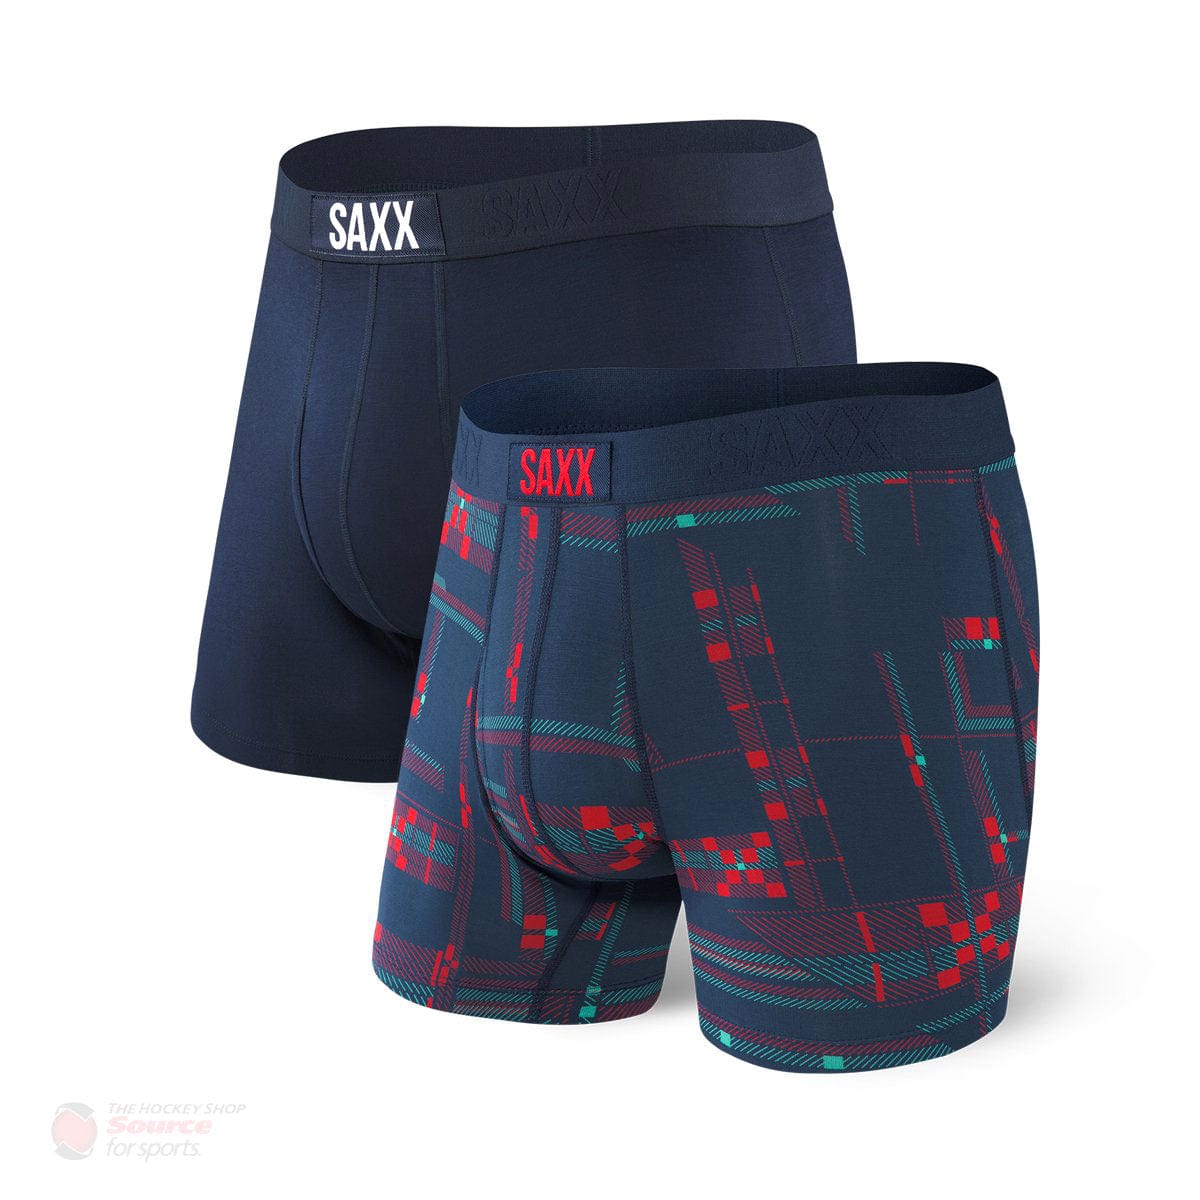 Saxx Ultra Boxers - Navy / Pulled Paid (2 Pack)